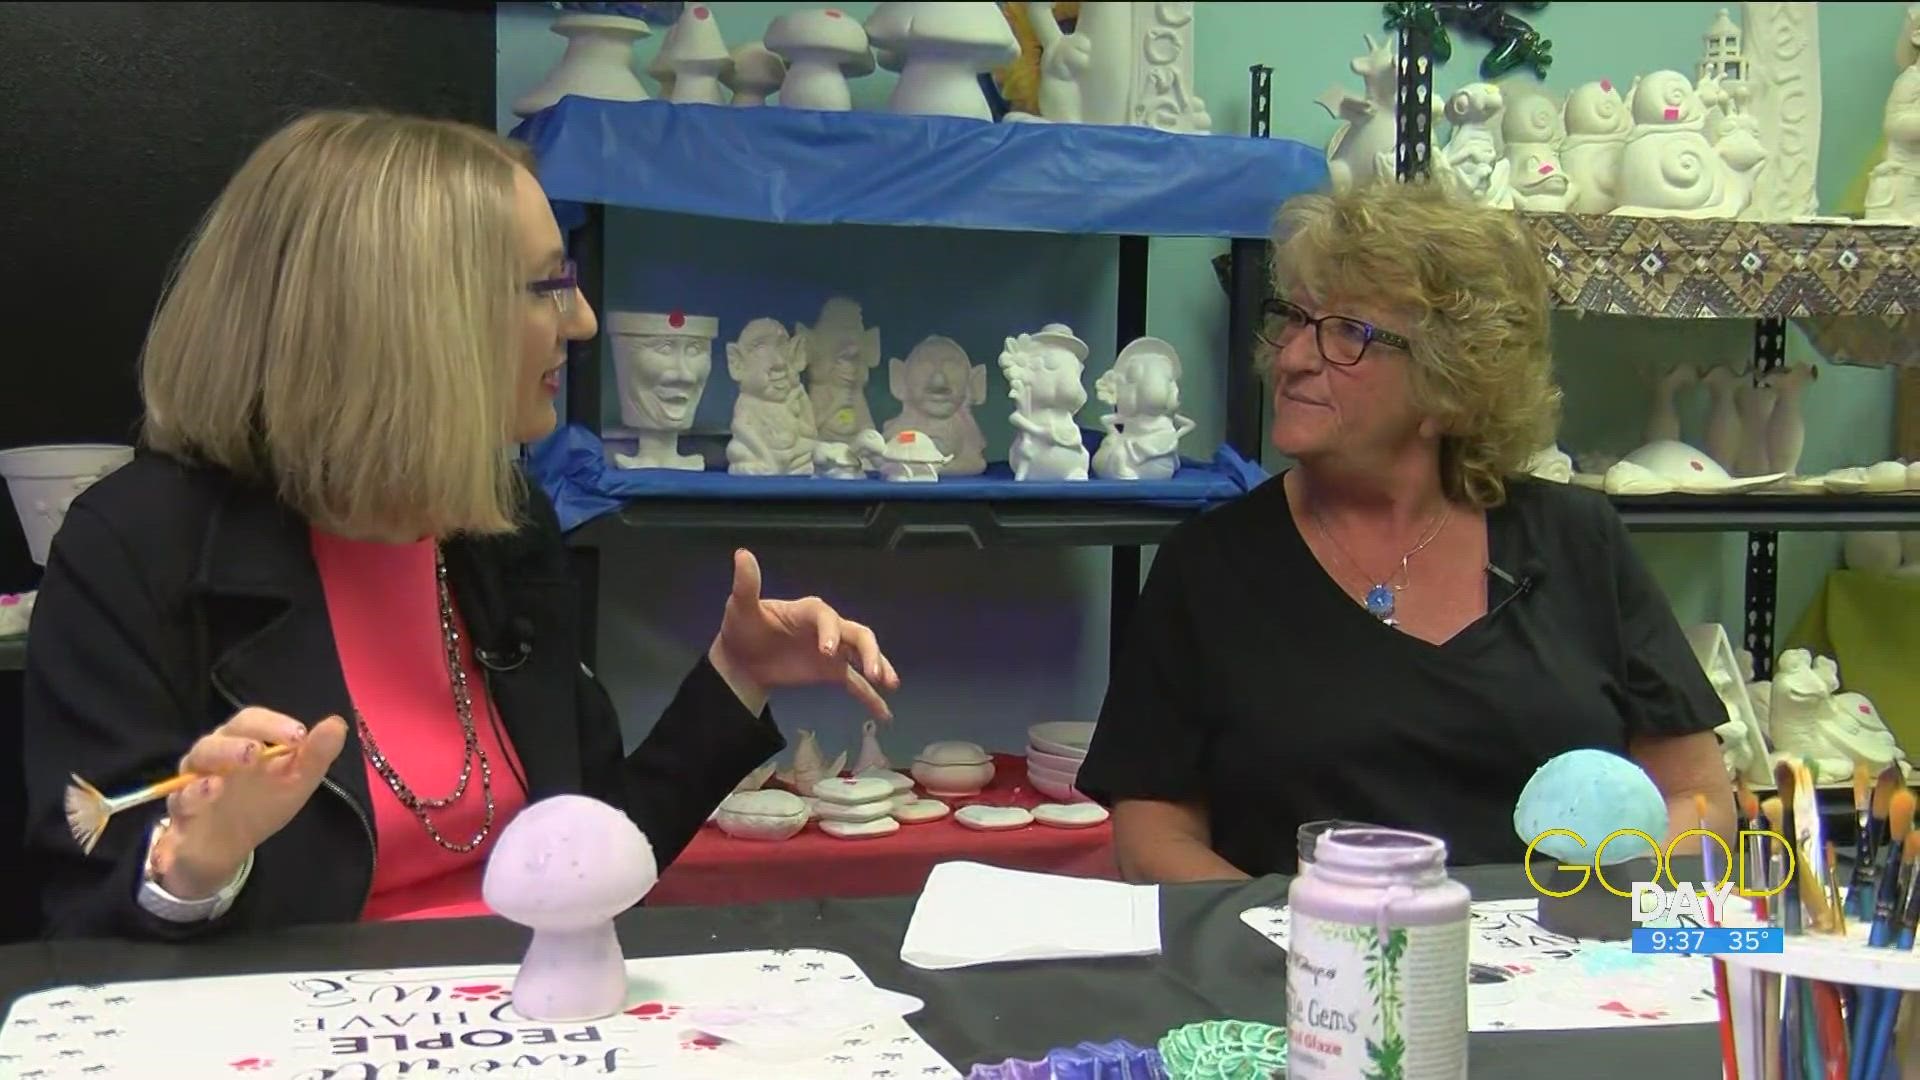 Laura Clark from Aqua Culture in Point Place talks her business, which sells specialty tropical fish and resources, and offers an opportunity to create ceramics.